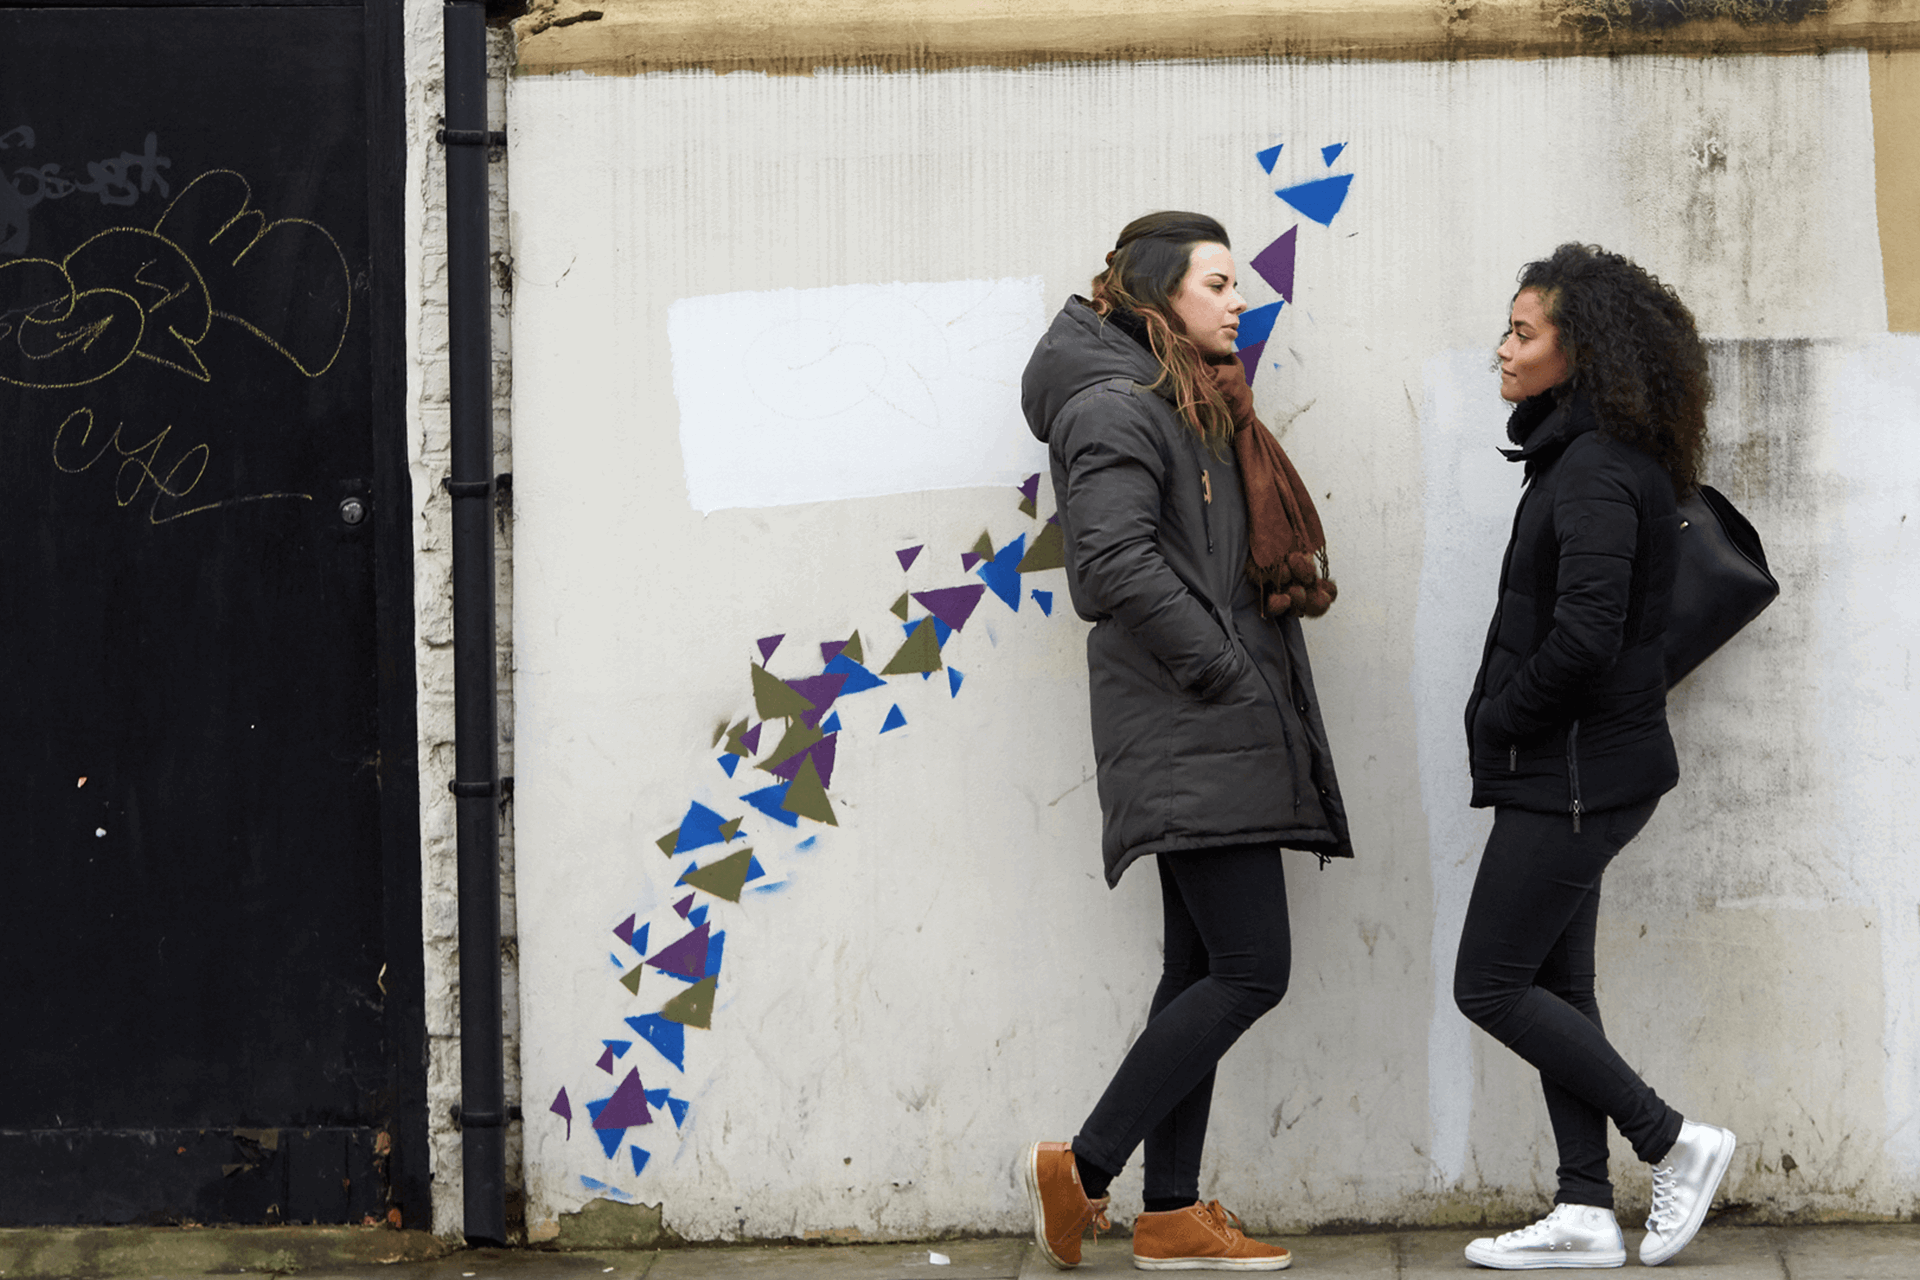 Two girls wearing black jackets are talking while standing against a wall decorated with blue, purple and green graffiti patterns.